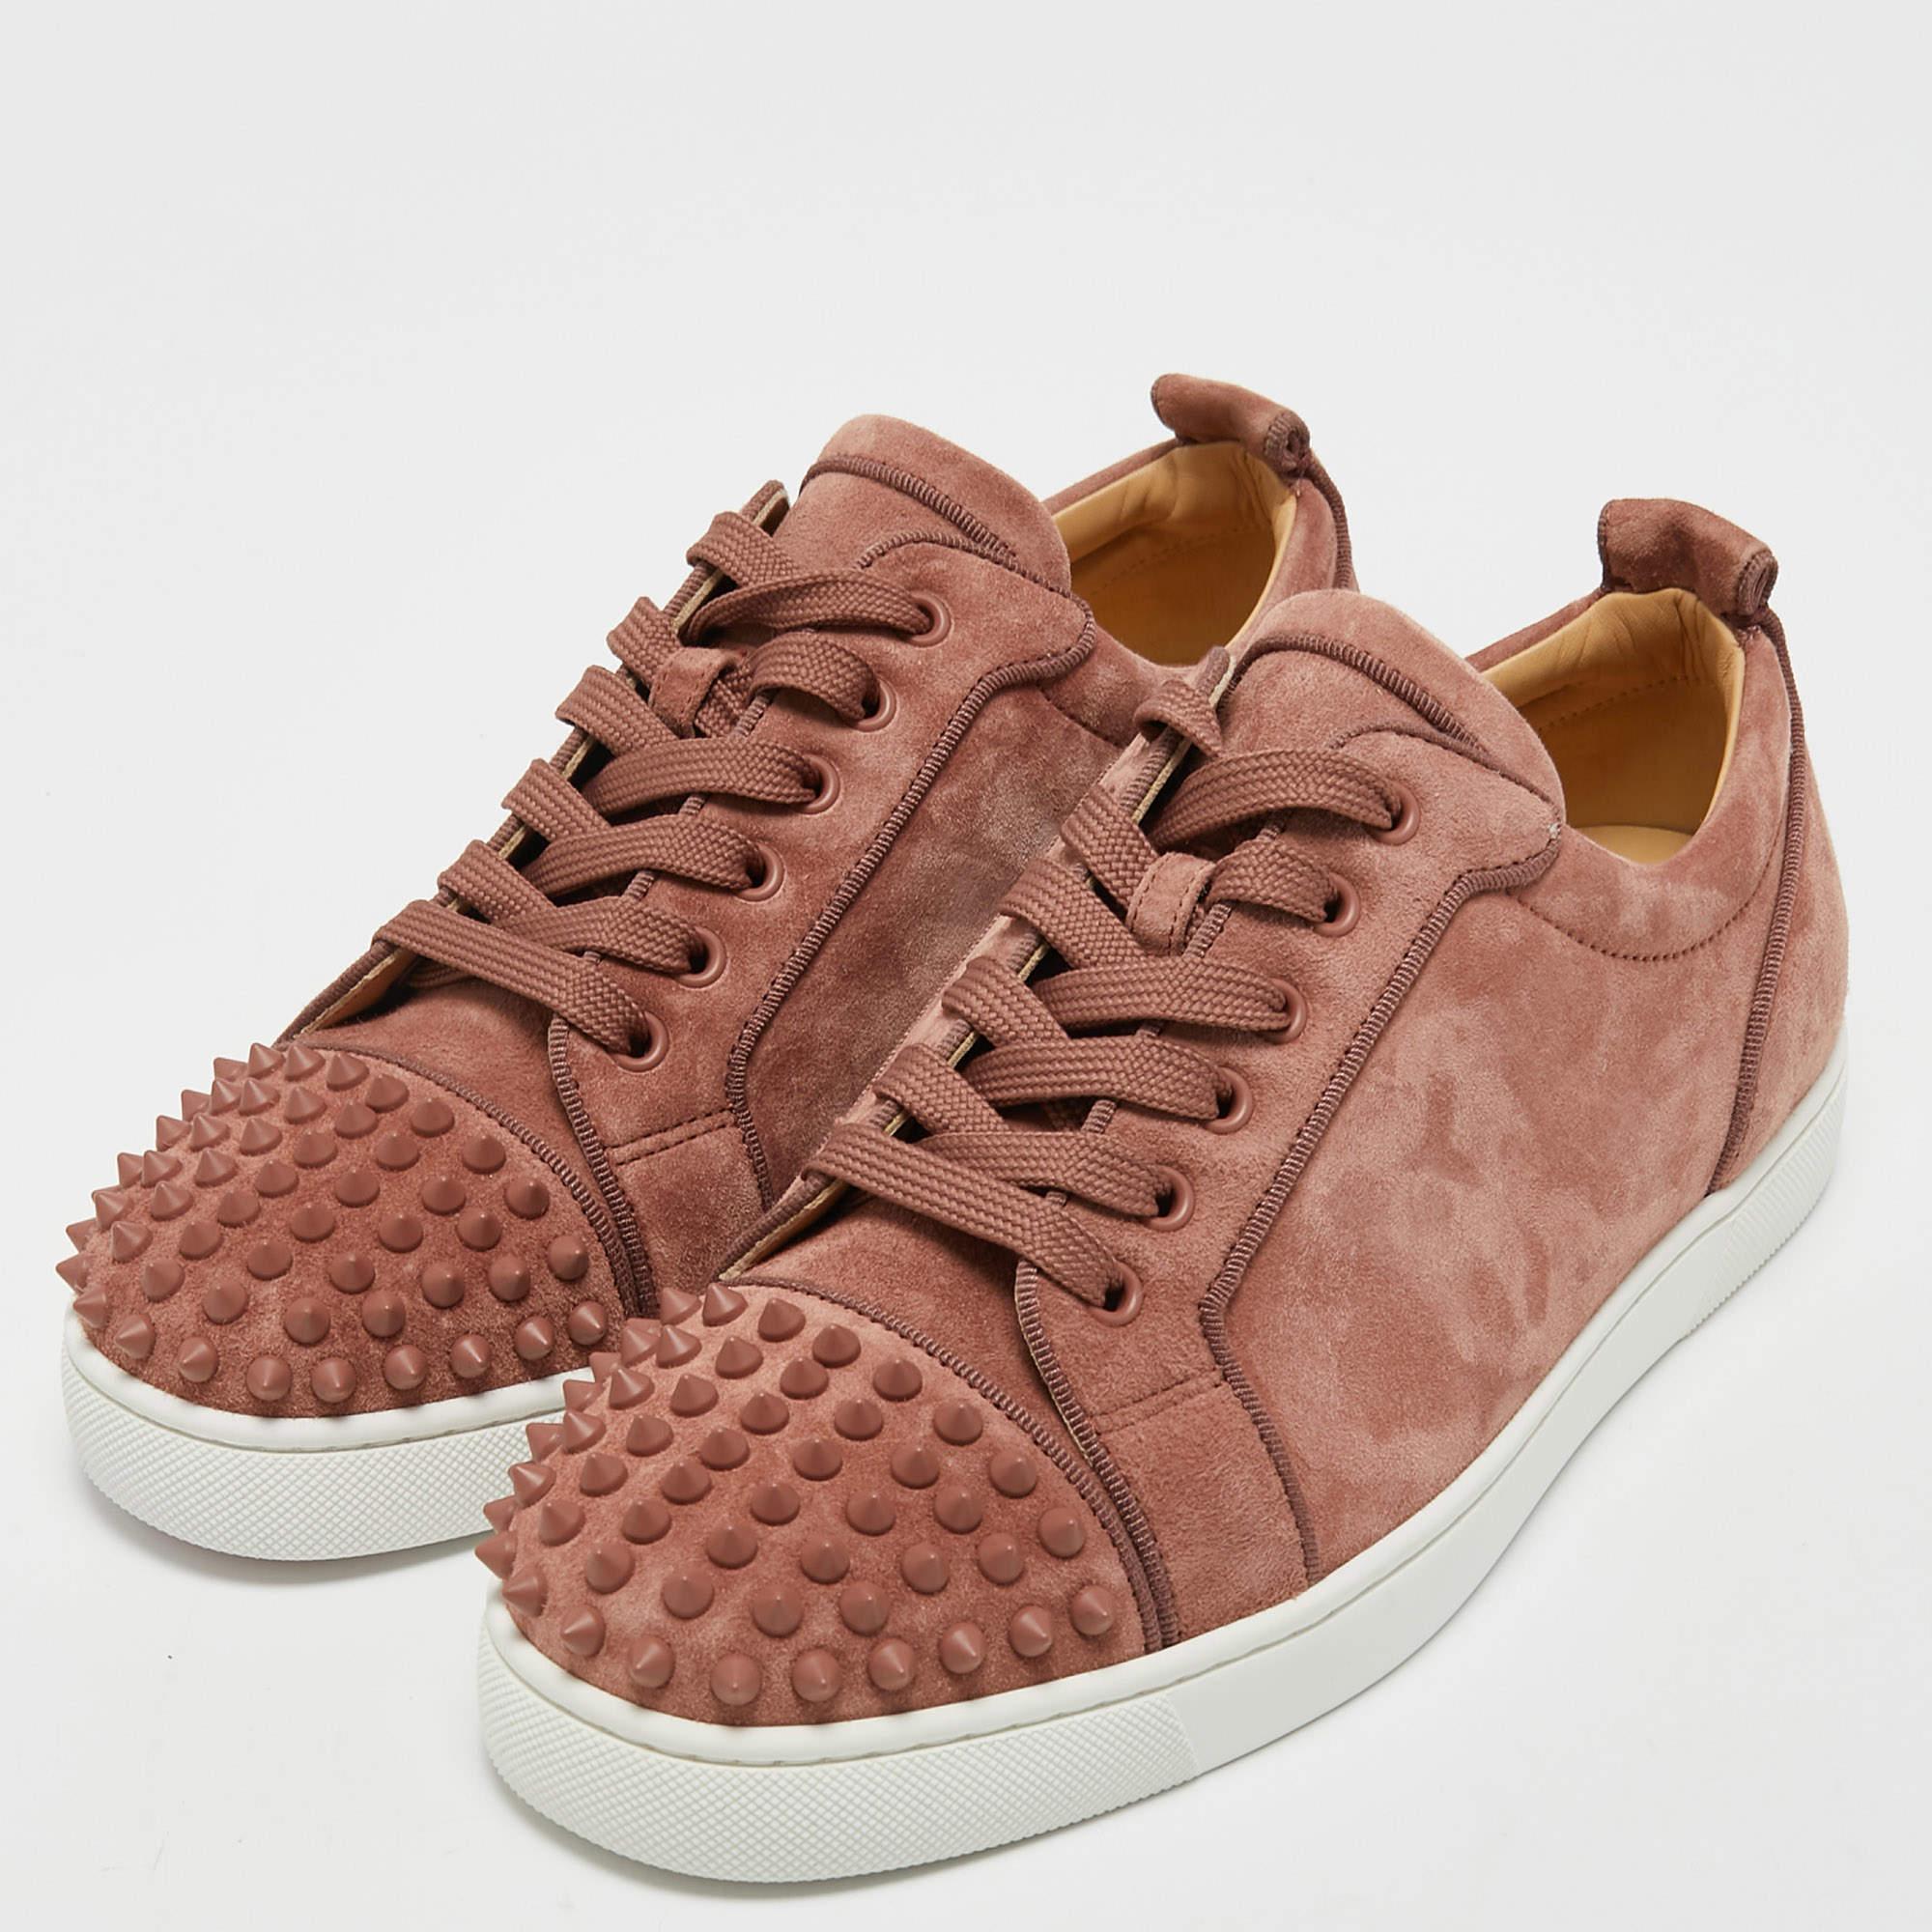 The Christian Louboutin Louis Junior sneakers are luxurious and edgy footwear. Made from premium light pink suede, they boast a low-top design with iconic red rubber soles. The sneakers are adorned with signature spikes, adding a bold and